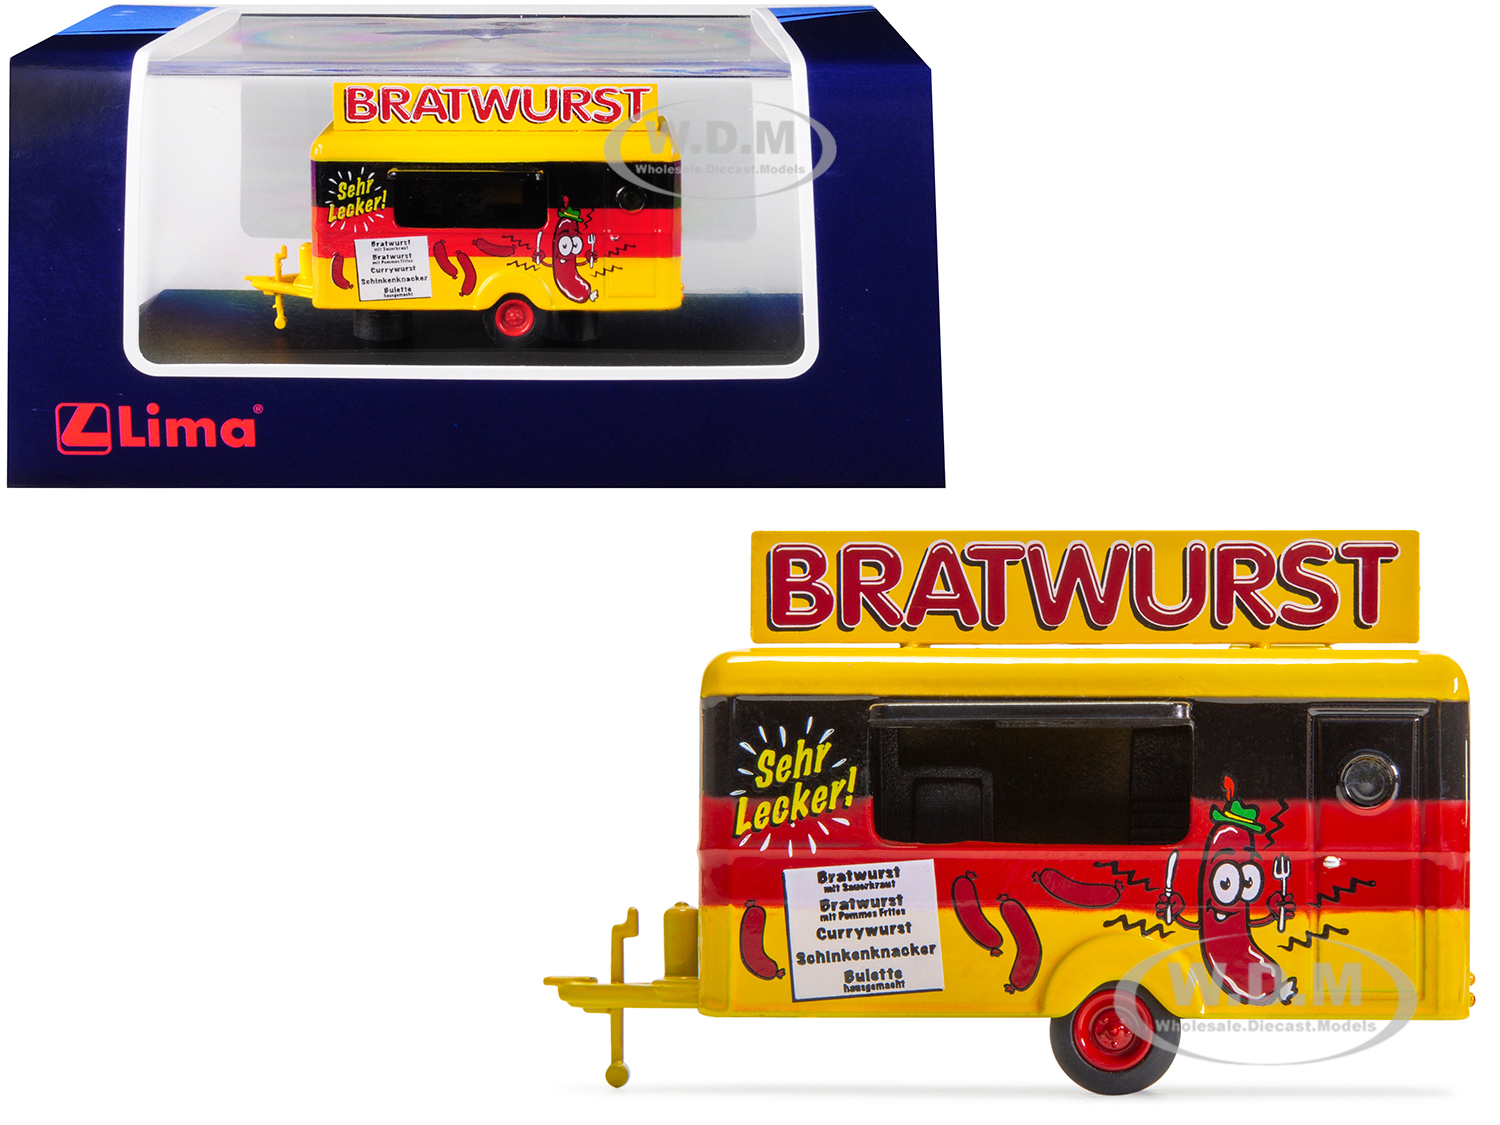 Mobile Food Trailer "bratwurst" (germany) 1/87 (ho) Scale Diecast Model By Lima